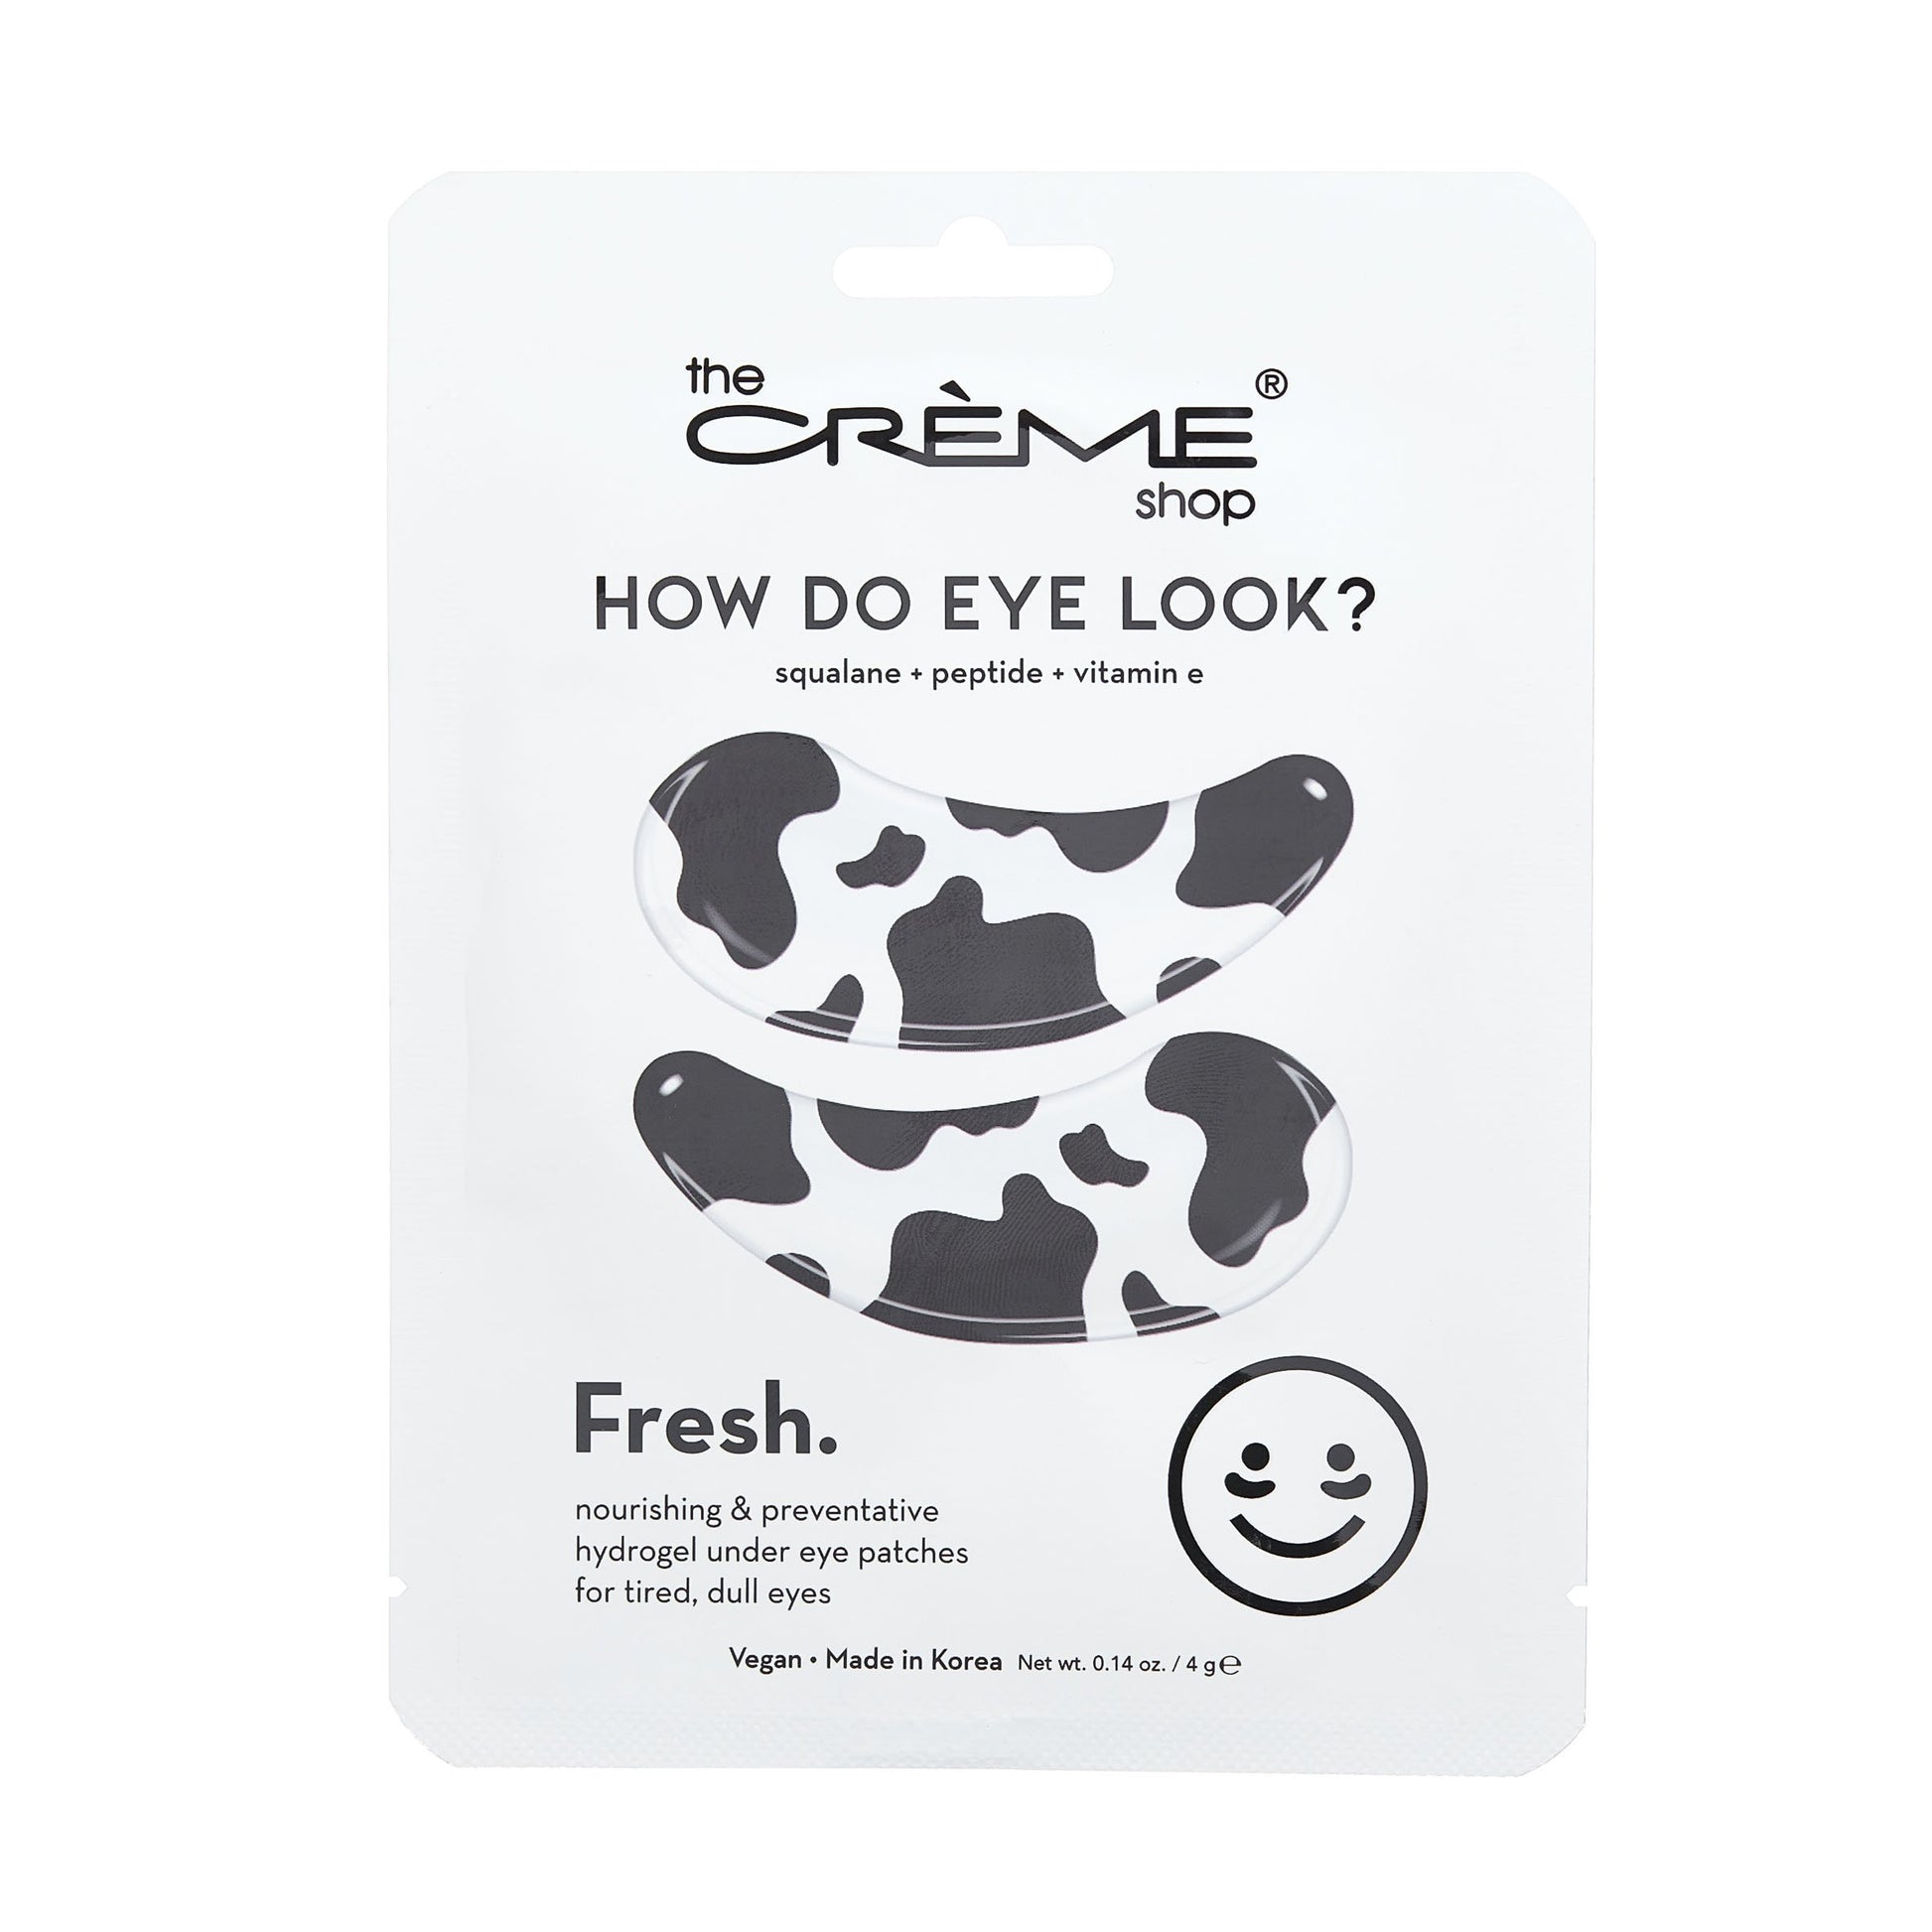 How Do Eye Look? Fresh - Under Eye Patches for nourishing & revitalizing - The Crème Shop